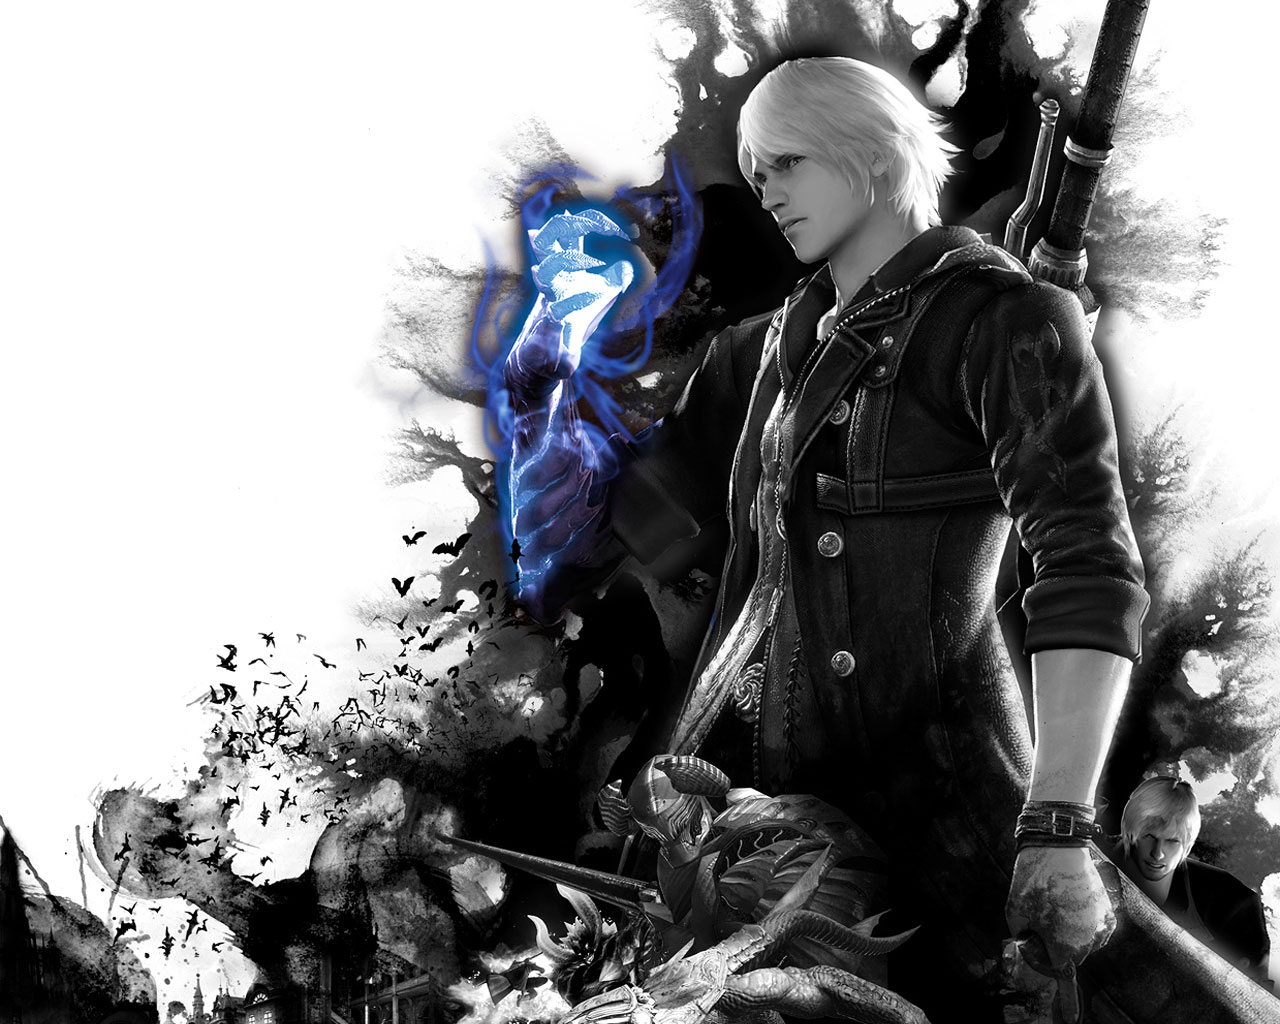 Devil May Cry Wallpaper 1280x1024 42721